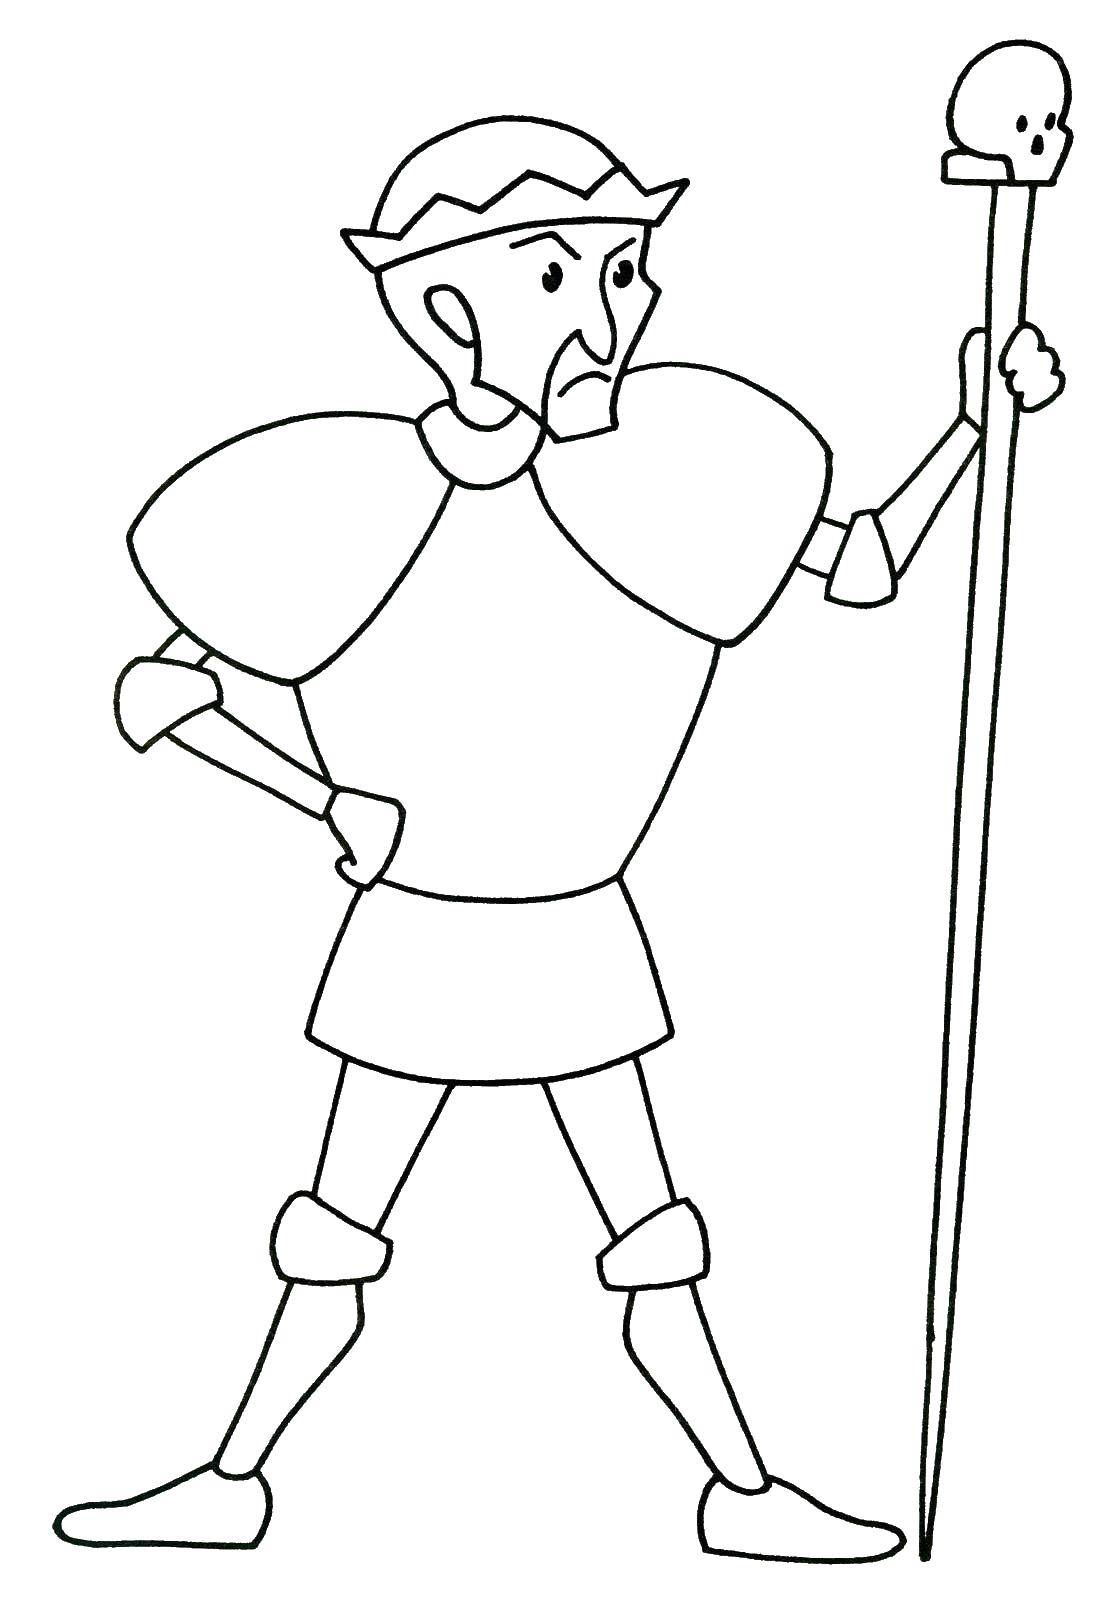 Coloring Warrior. Category Coloring pages for kids. Tags:  Warrior , knight.